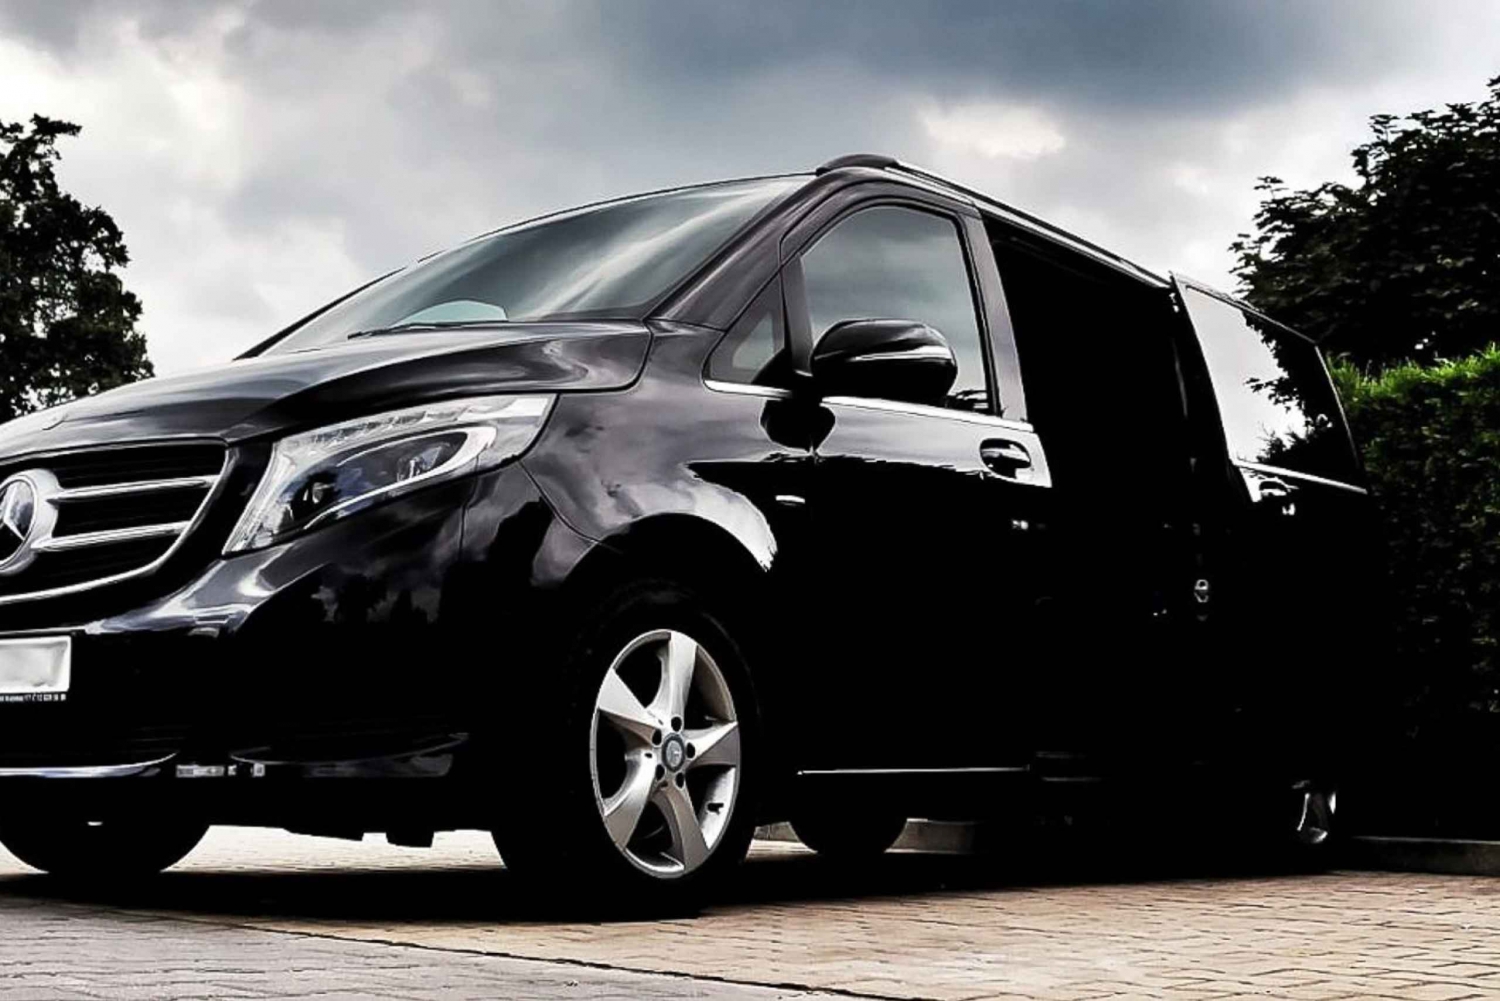 Warsaw City/Airport Okecie: Private Transfer from/to Krakow